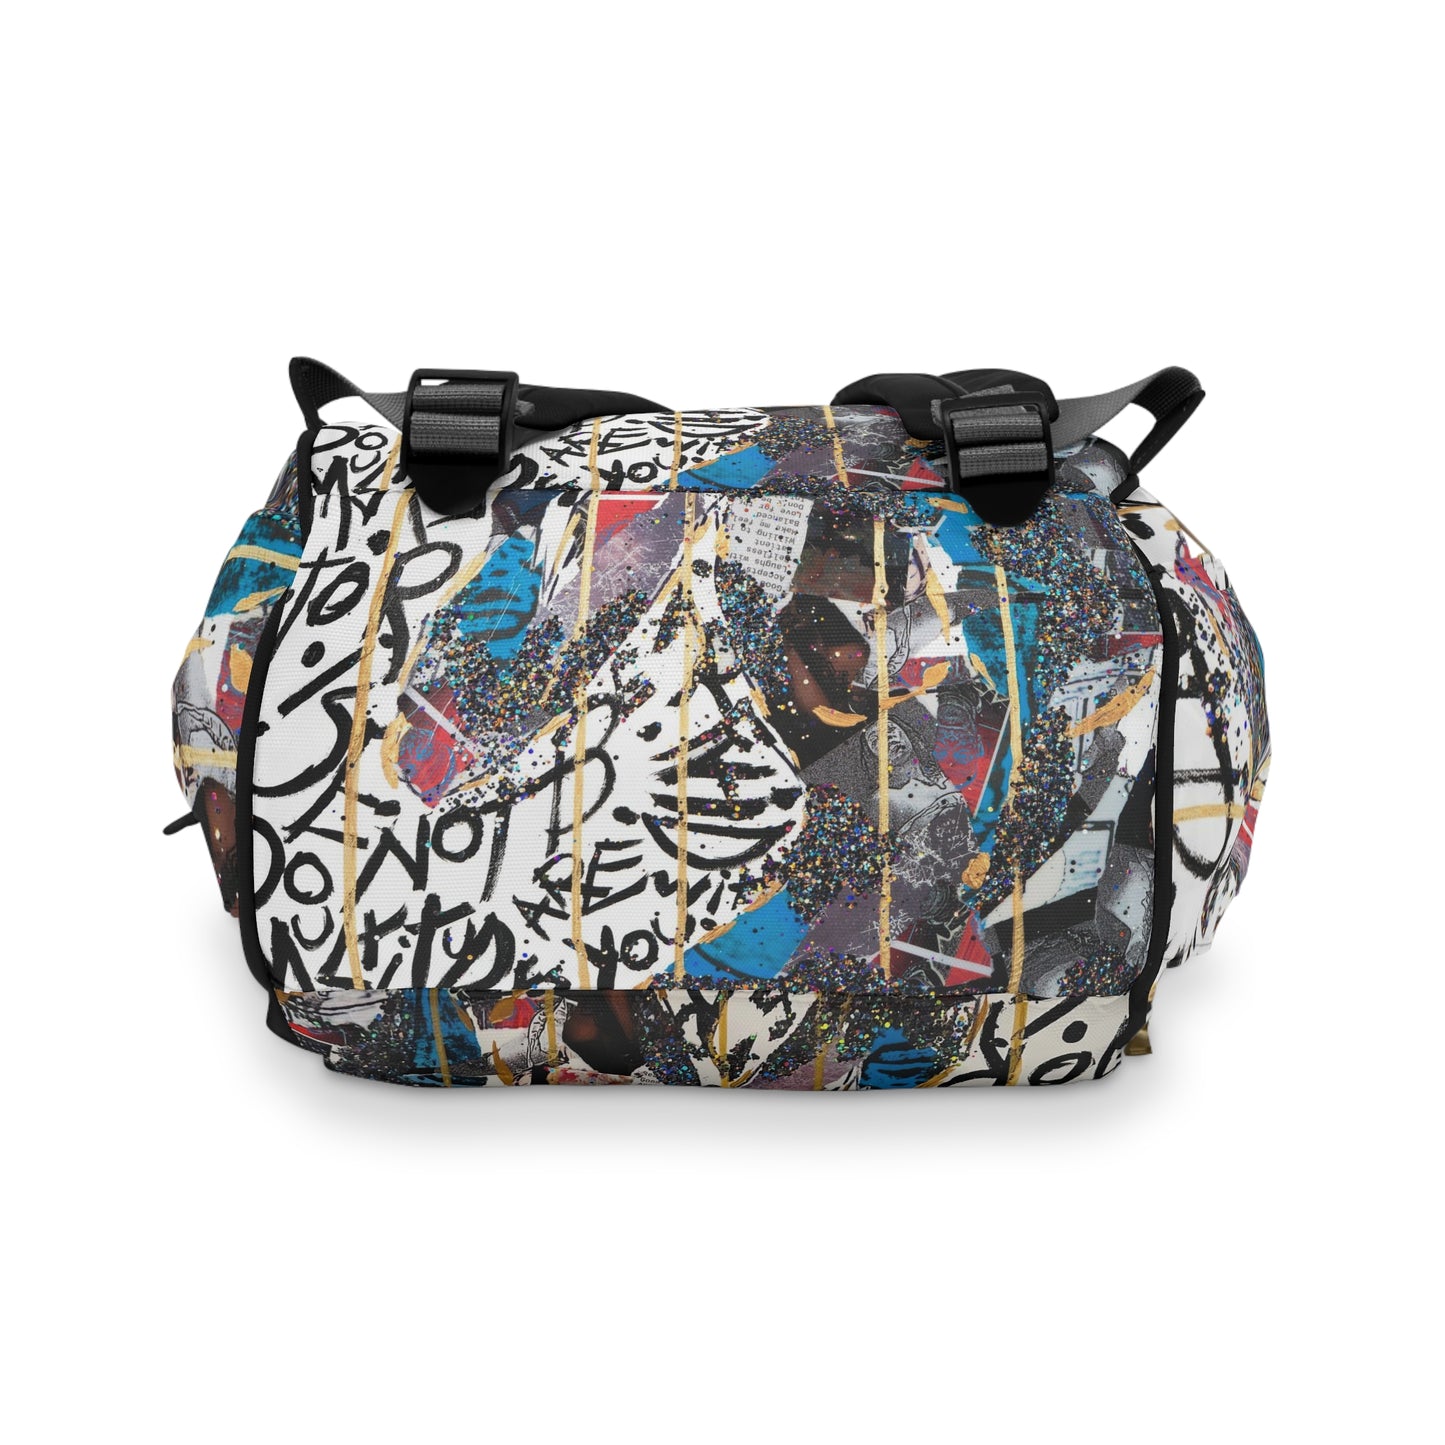 "Multitudes Within by Courtney Minor" Multifunctional Backpack